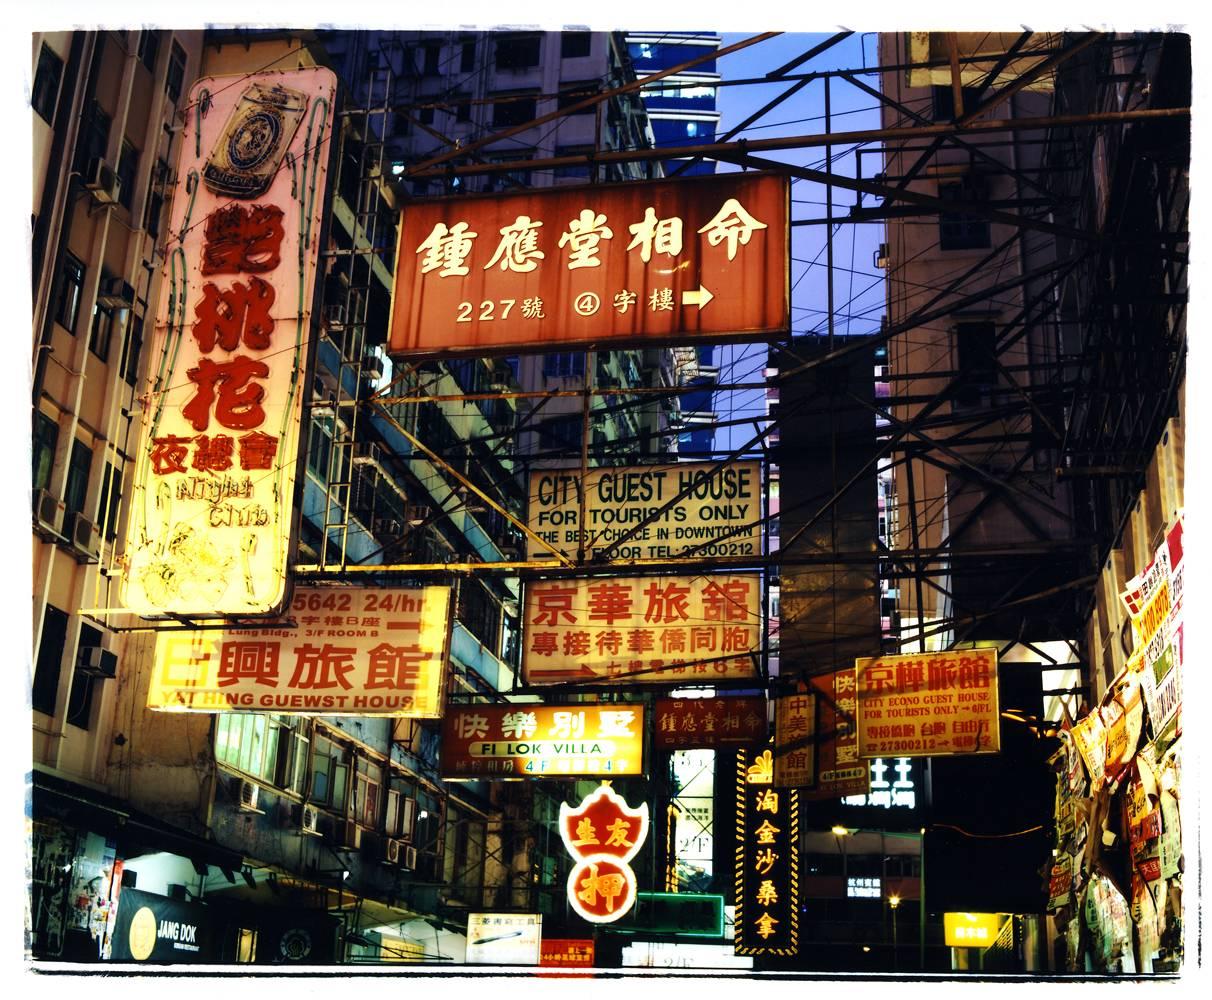 Best Choice in Downtown, Kowloon, Hong Kong - Photographie d'architecture asiatique